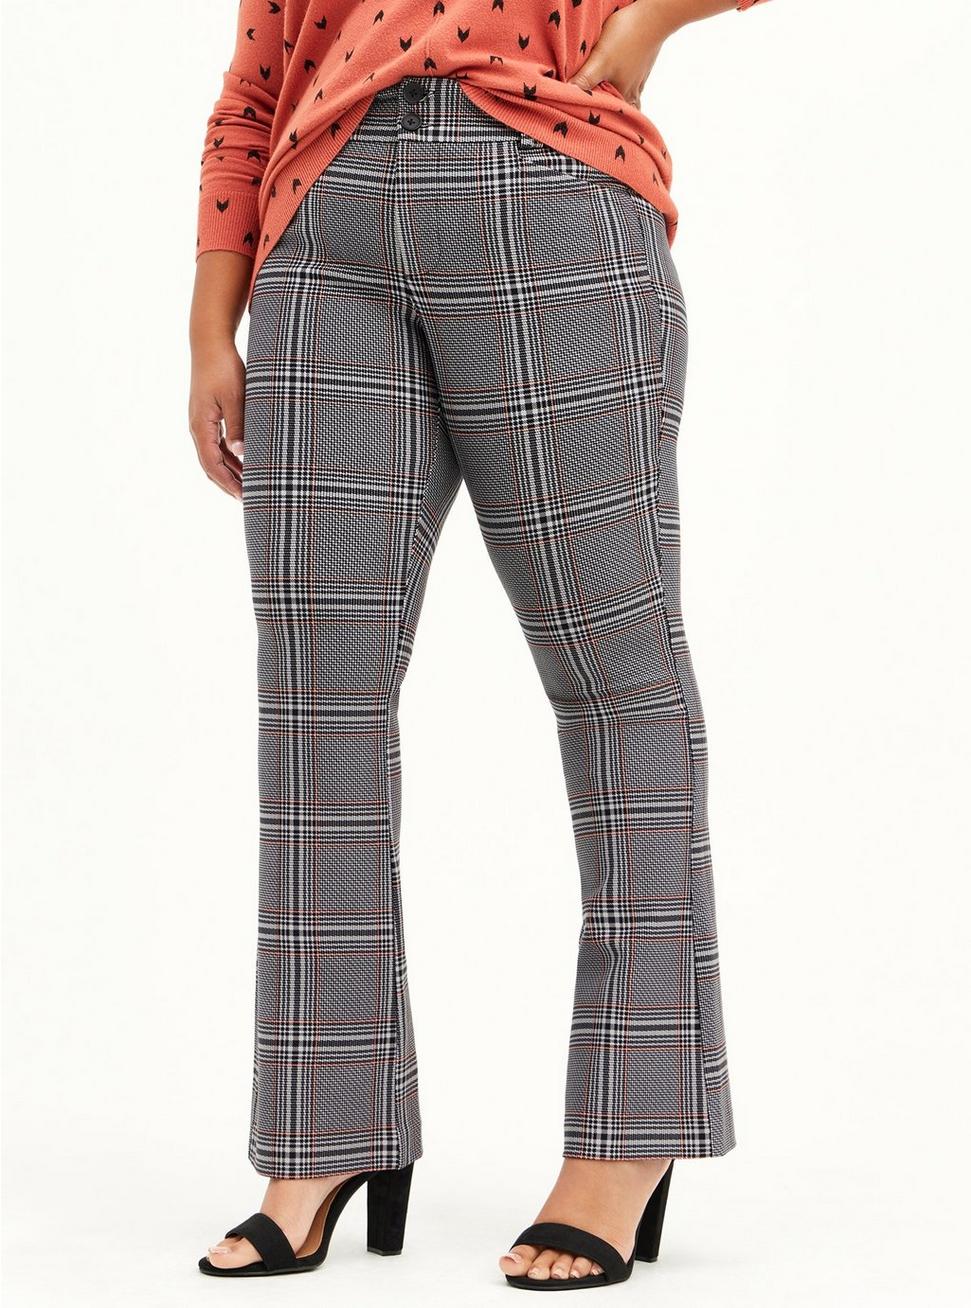 Trouser Slim Boot Studio Luxe Ponte Mid-Rise Pant, OTHER PRINTS, hi-res